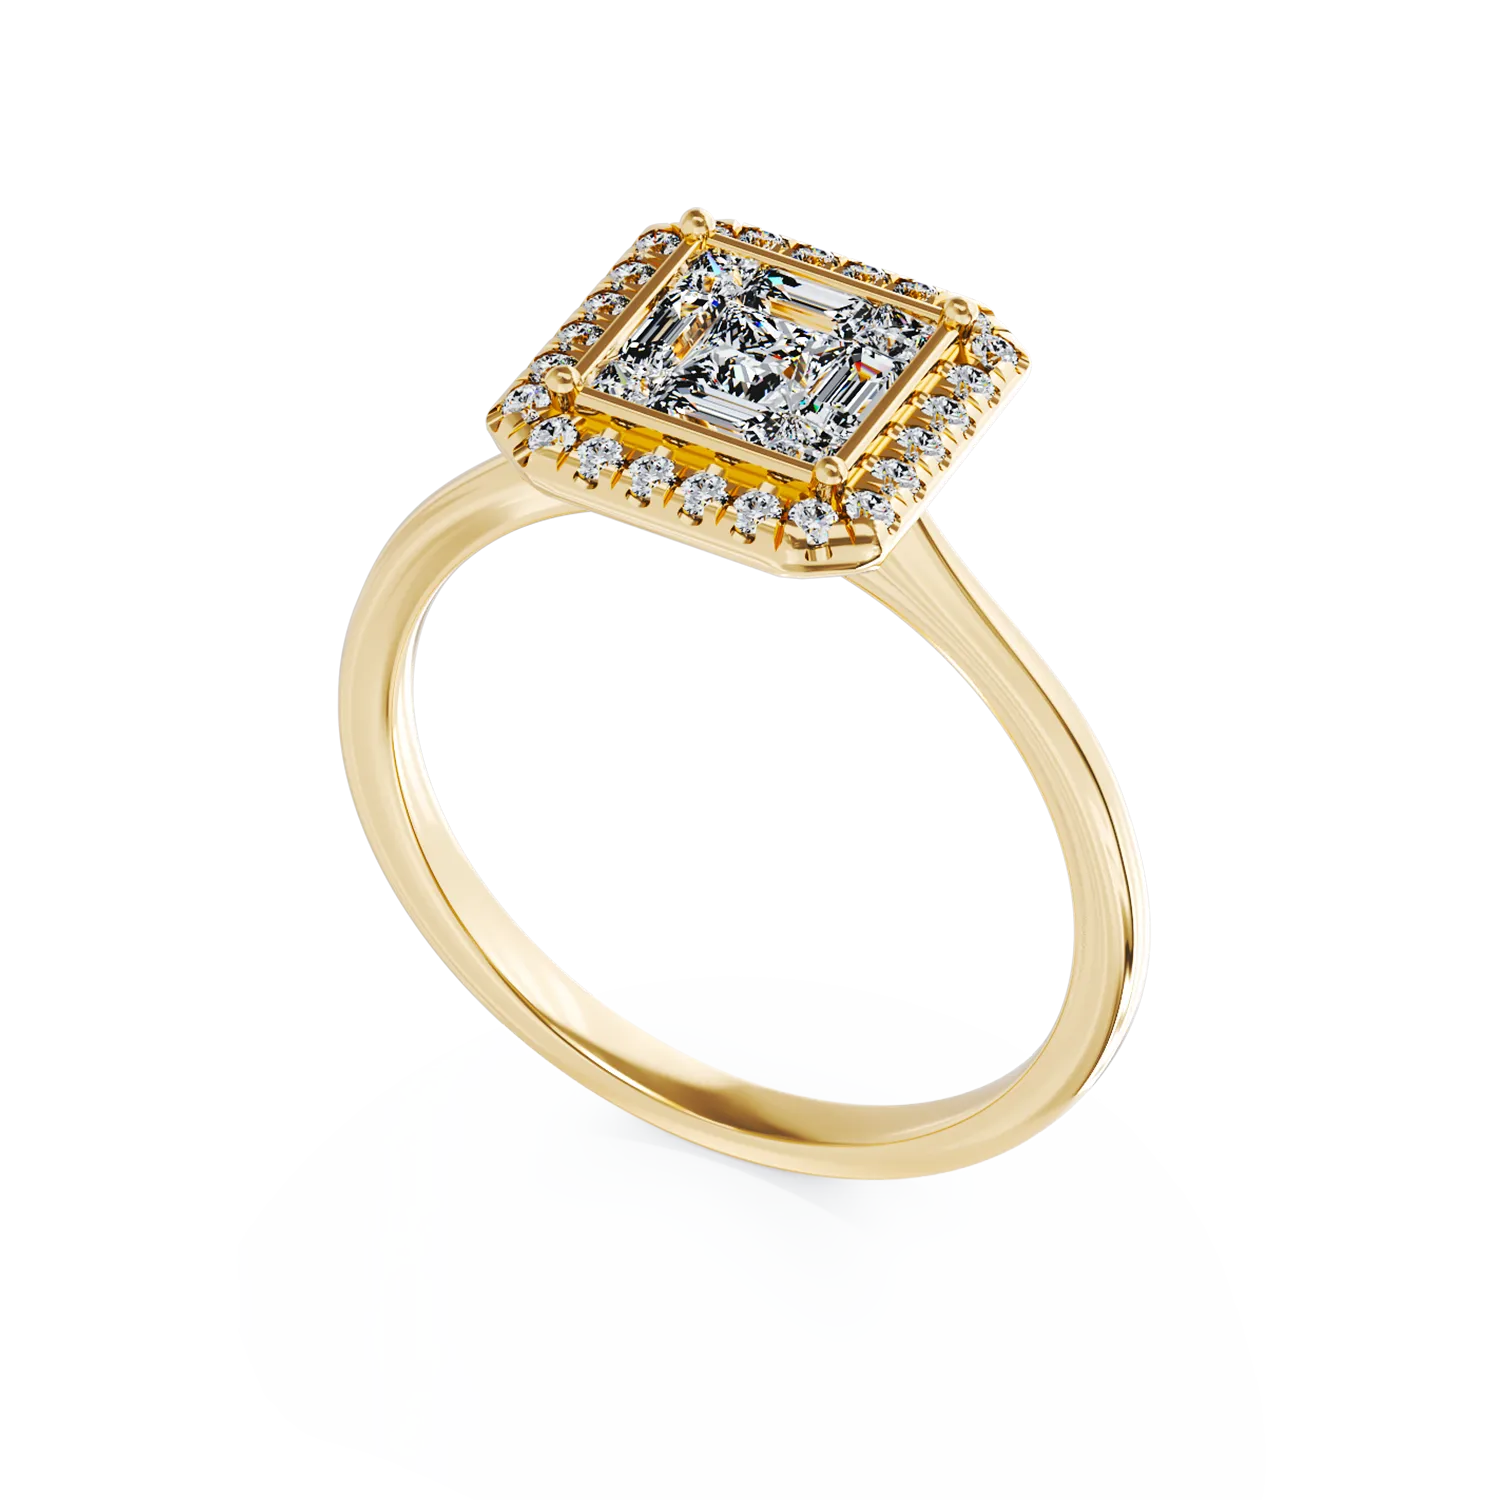 18k yellow gold engagement ring with 0.48ct diamonds